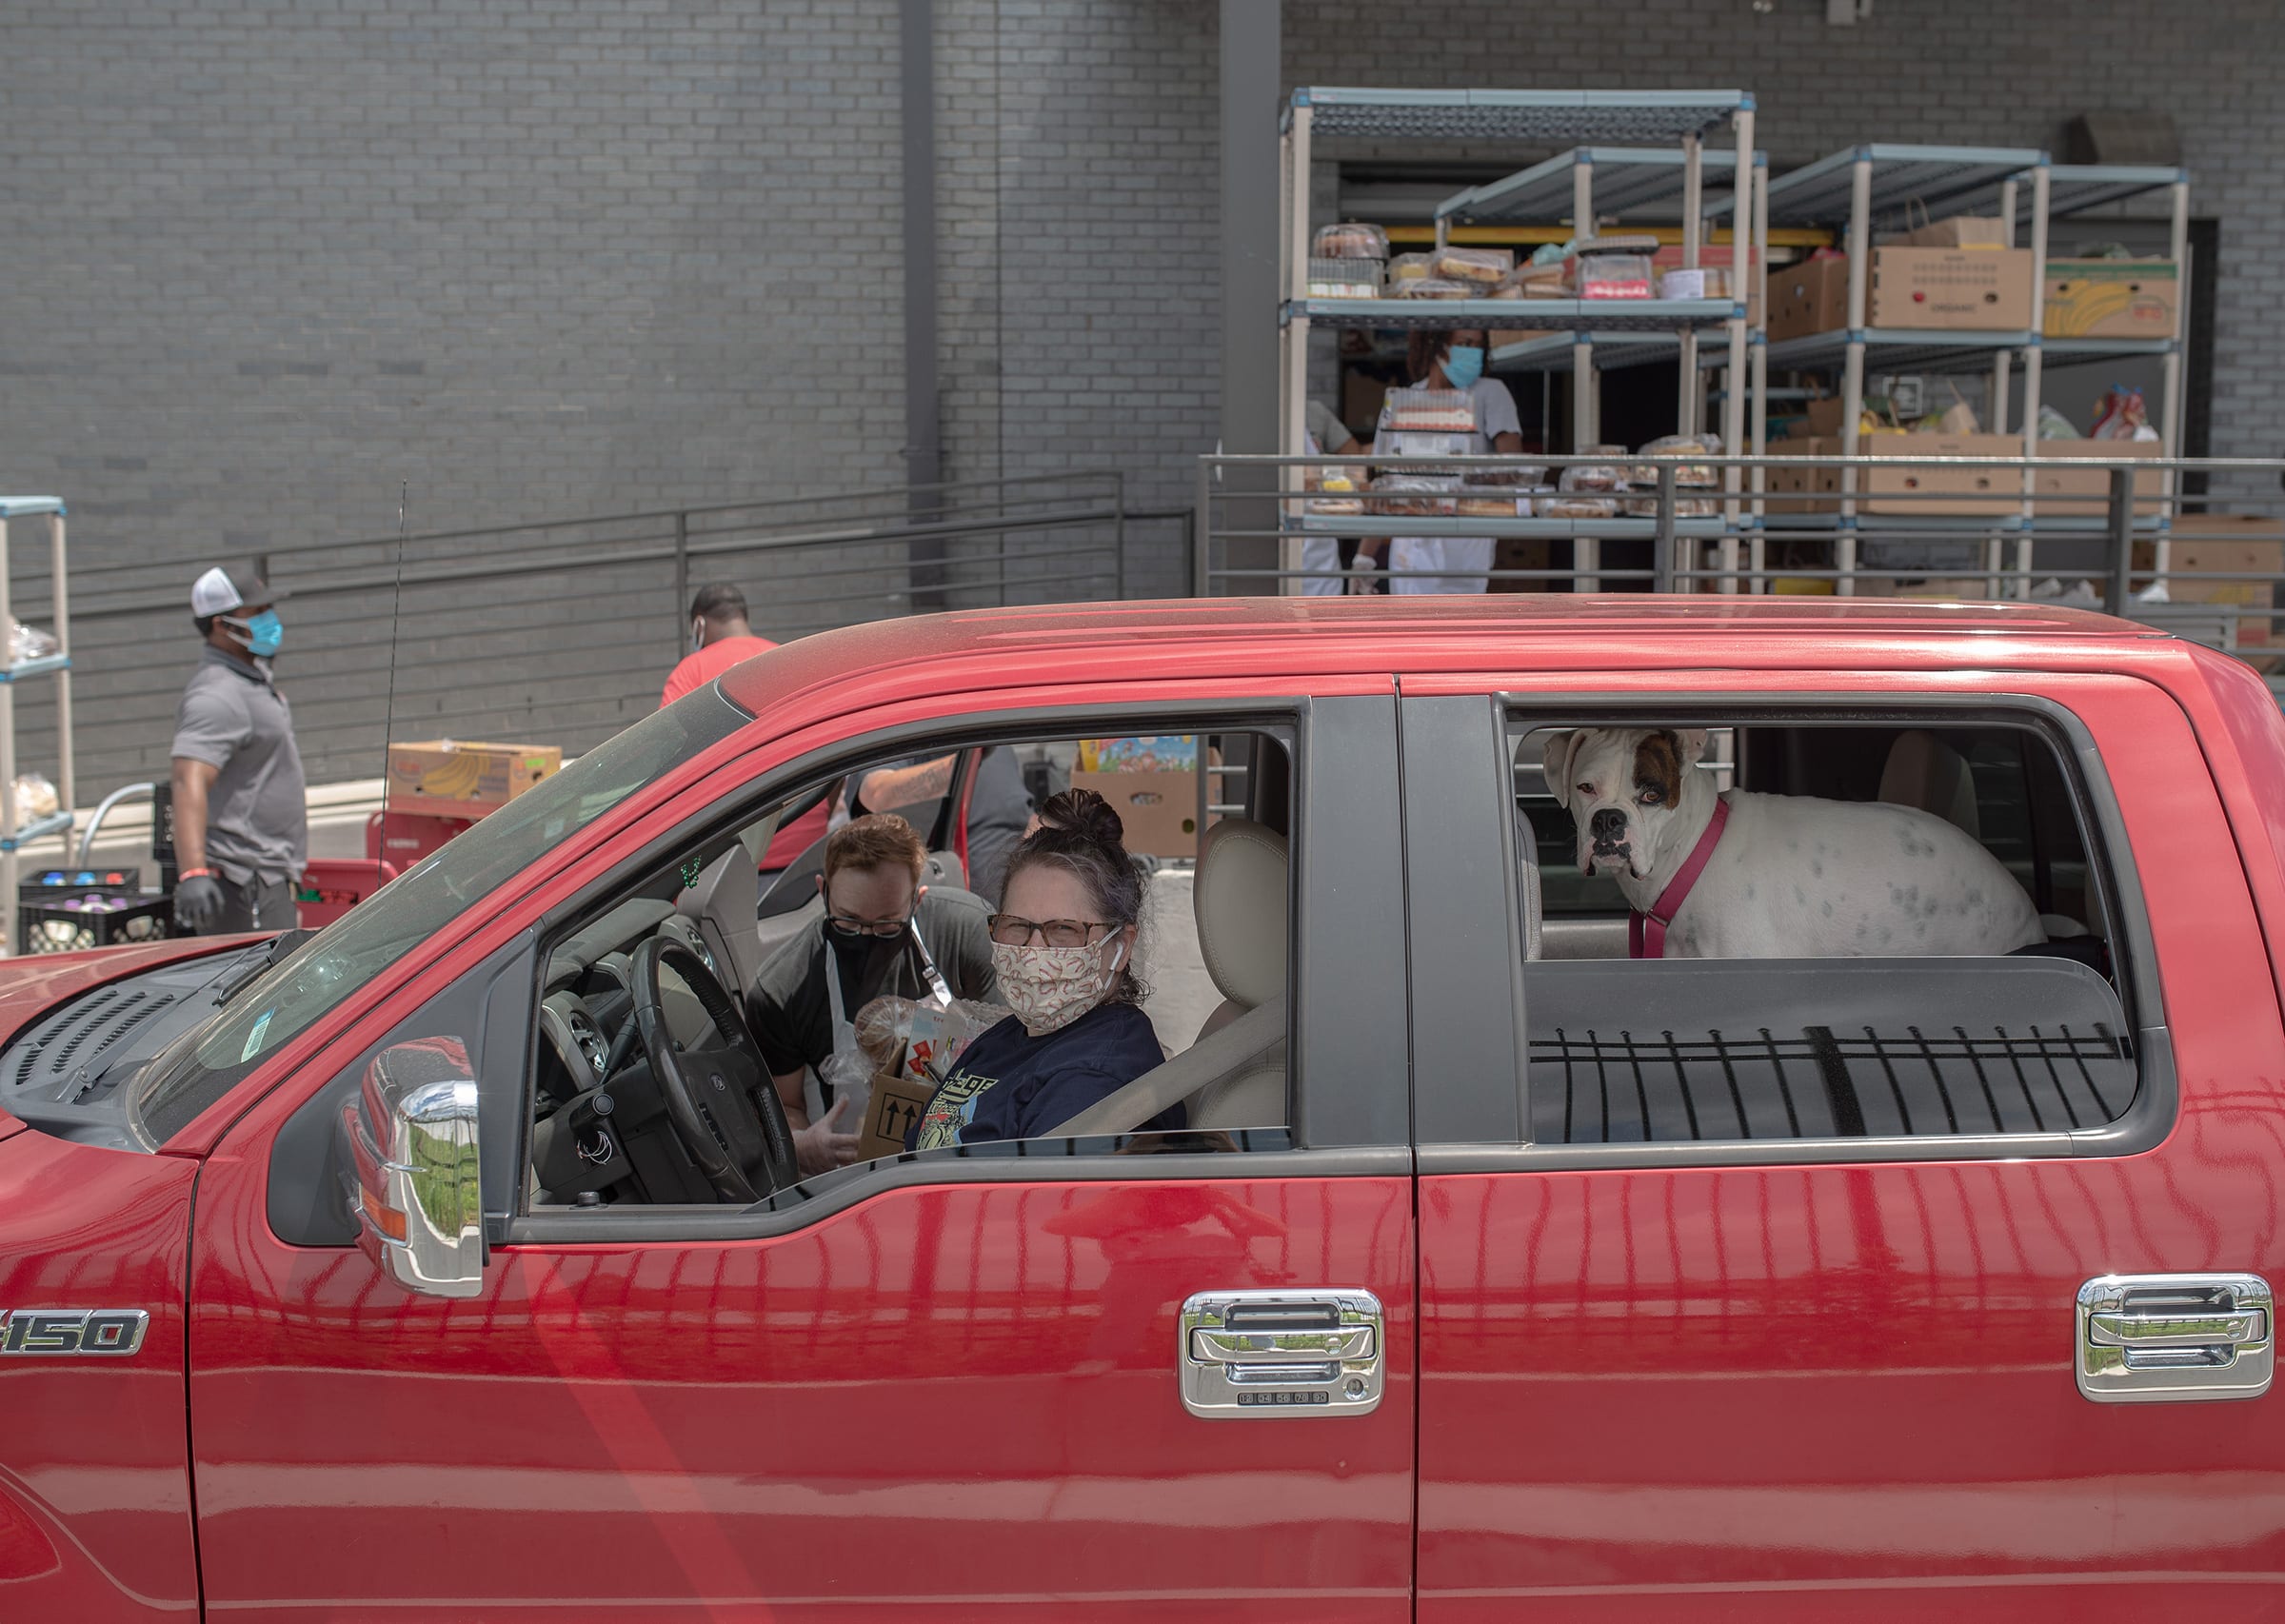 Stacy Aaensom, of Tulsa, Okla., on May 4. She picked up groceries at the Iron Gate drive-through food pantry for some relatives. “They haven’t asked me to do that but they don’t have a car,” she says,  so I’ve been doing that to help them out.